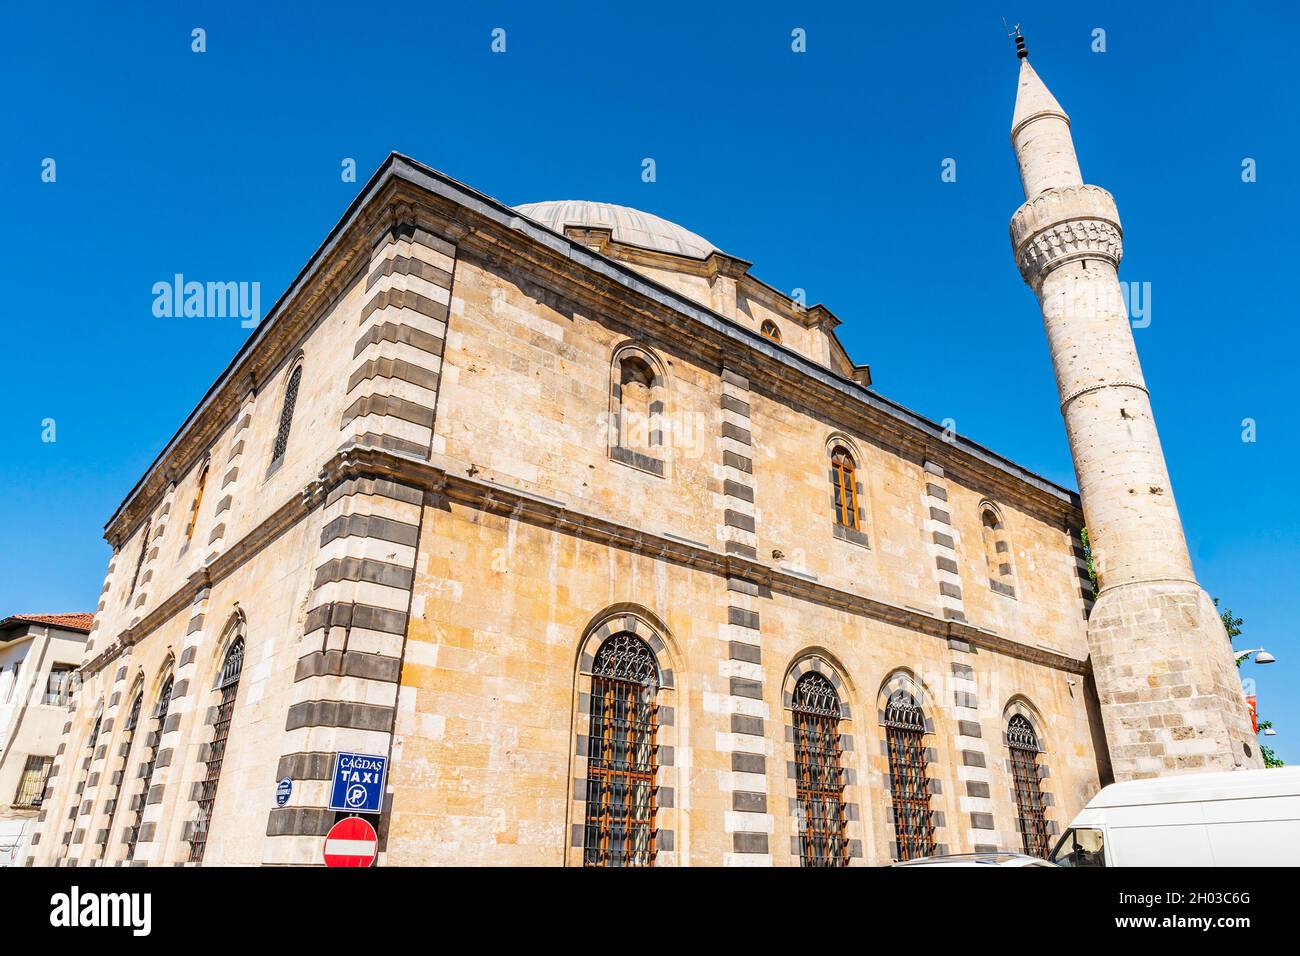 Gaziantep Alauddevle Mosque Breathtaking Picturesque View on a Blue Sky Day in Summer Stock Photo